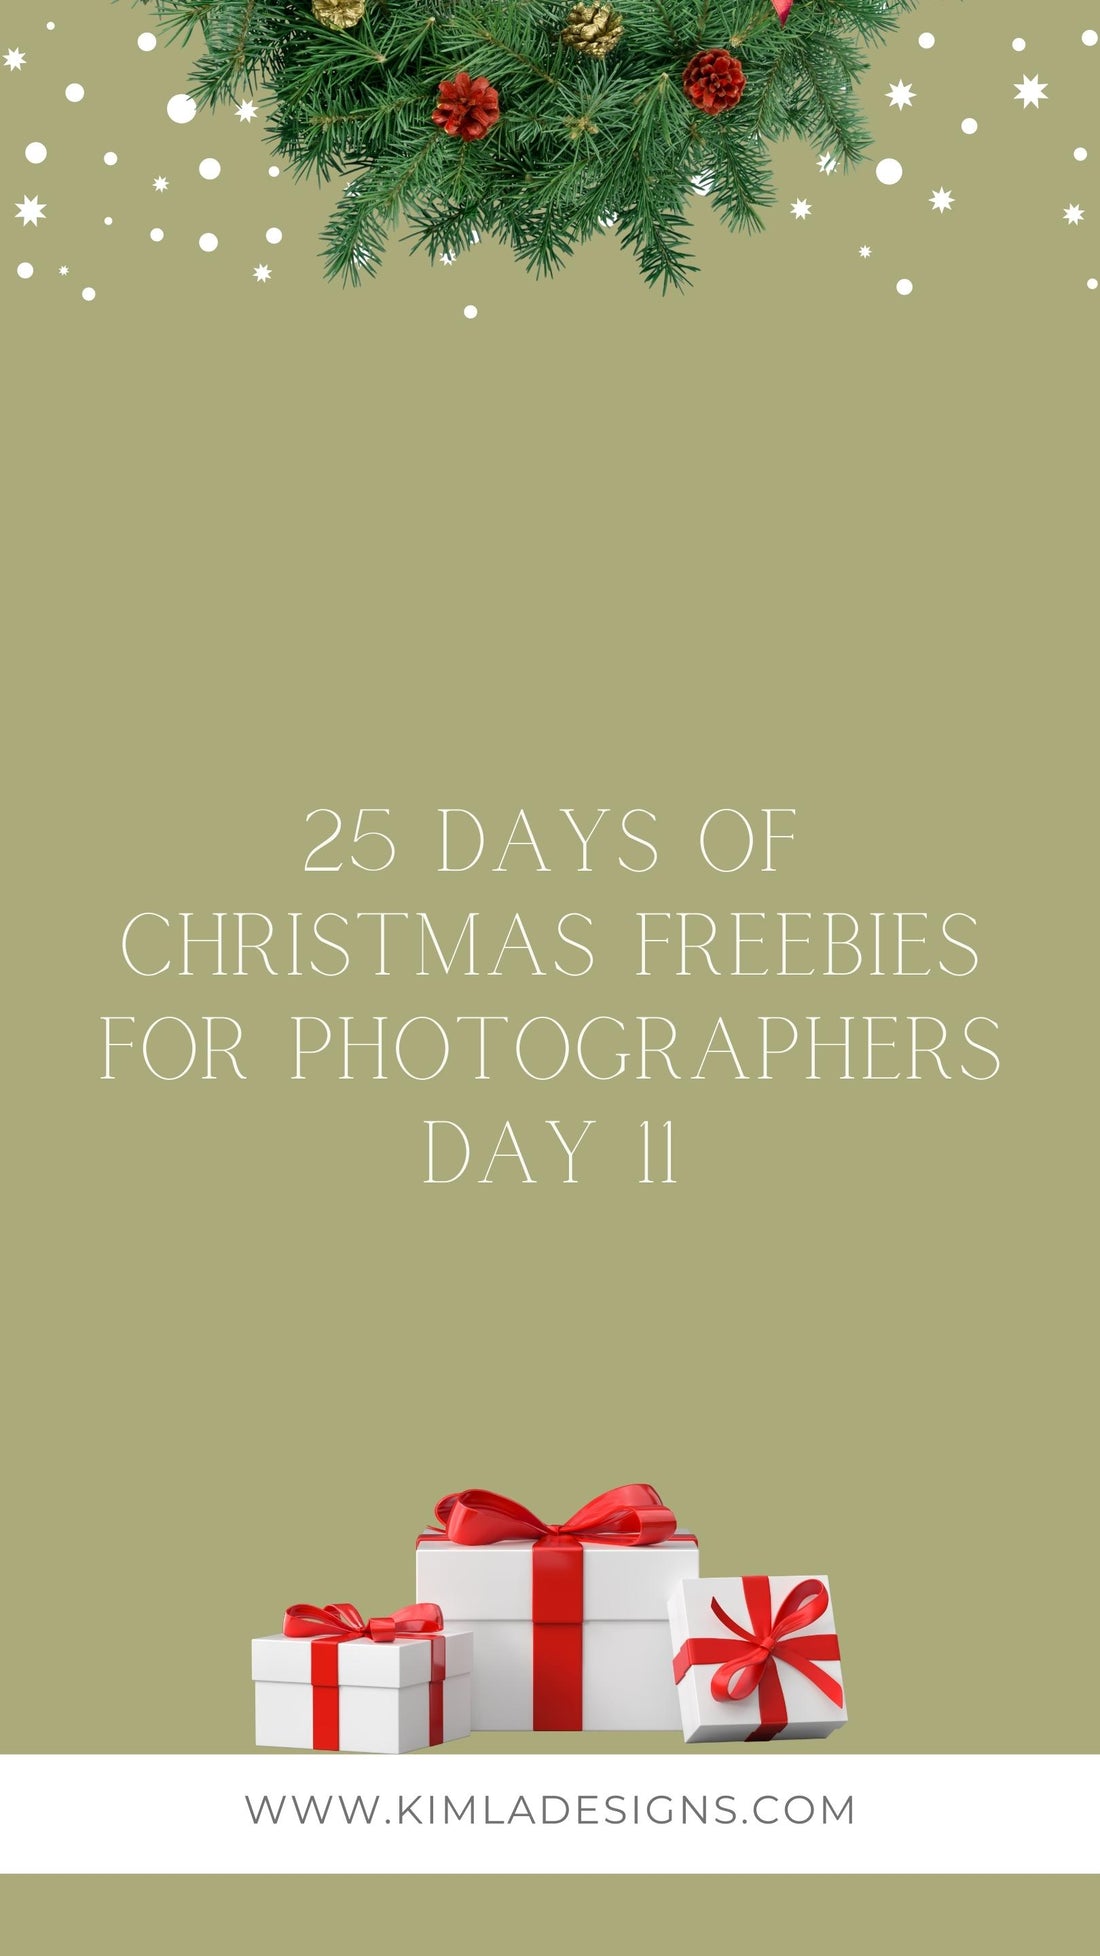 25 Days of Christmas Freebies Day 11th